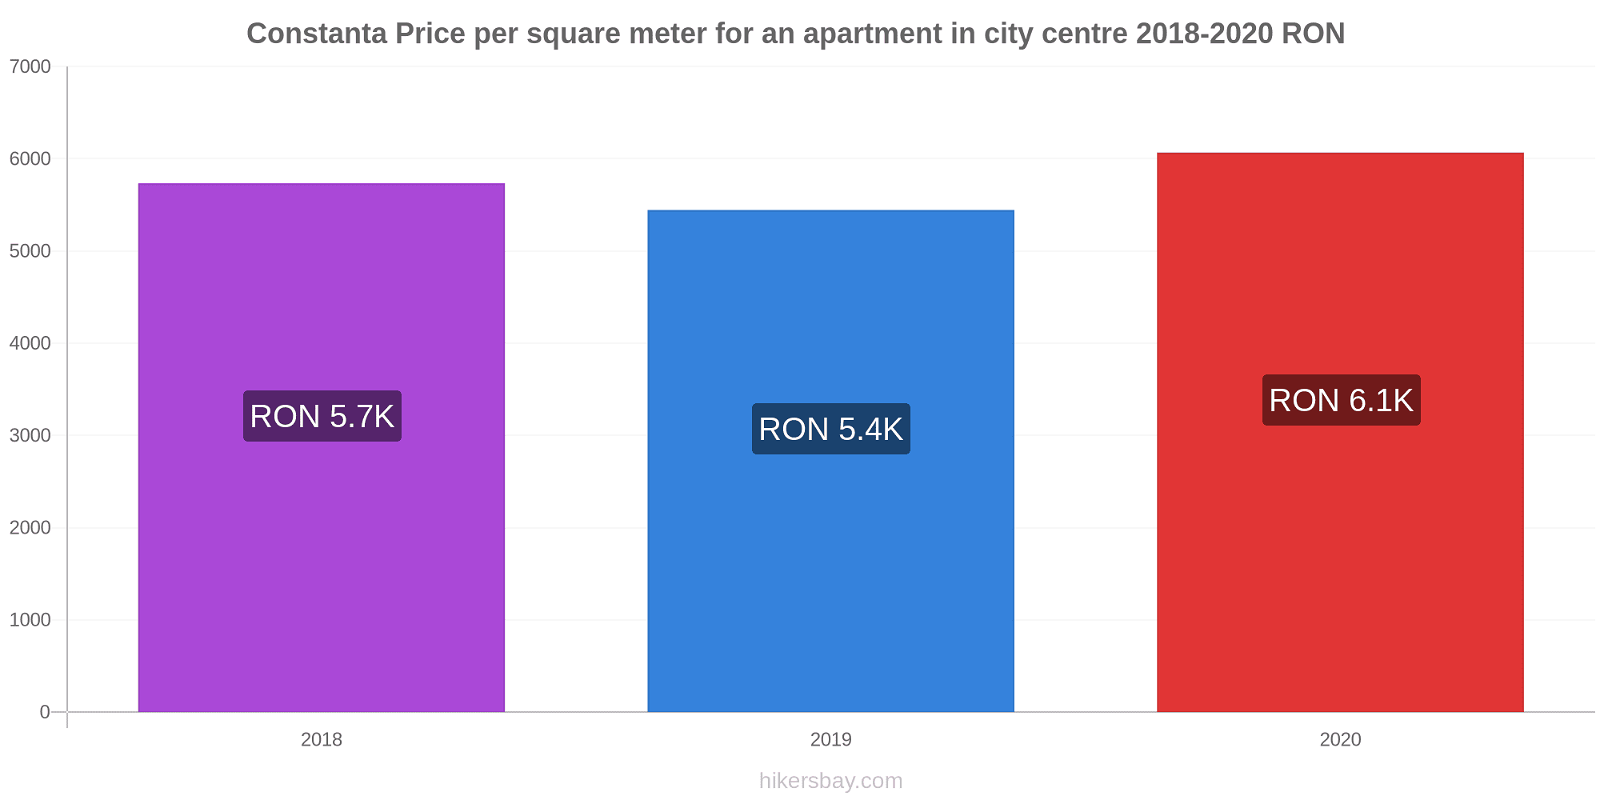 Constanta price changes Price per square meter for an apartment in city centre hikersbay.com